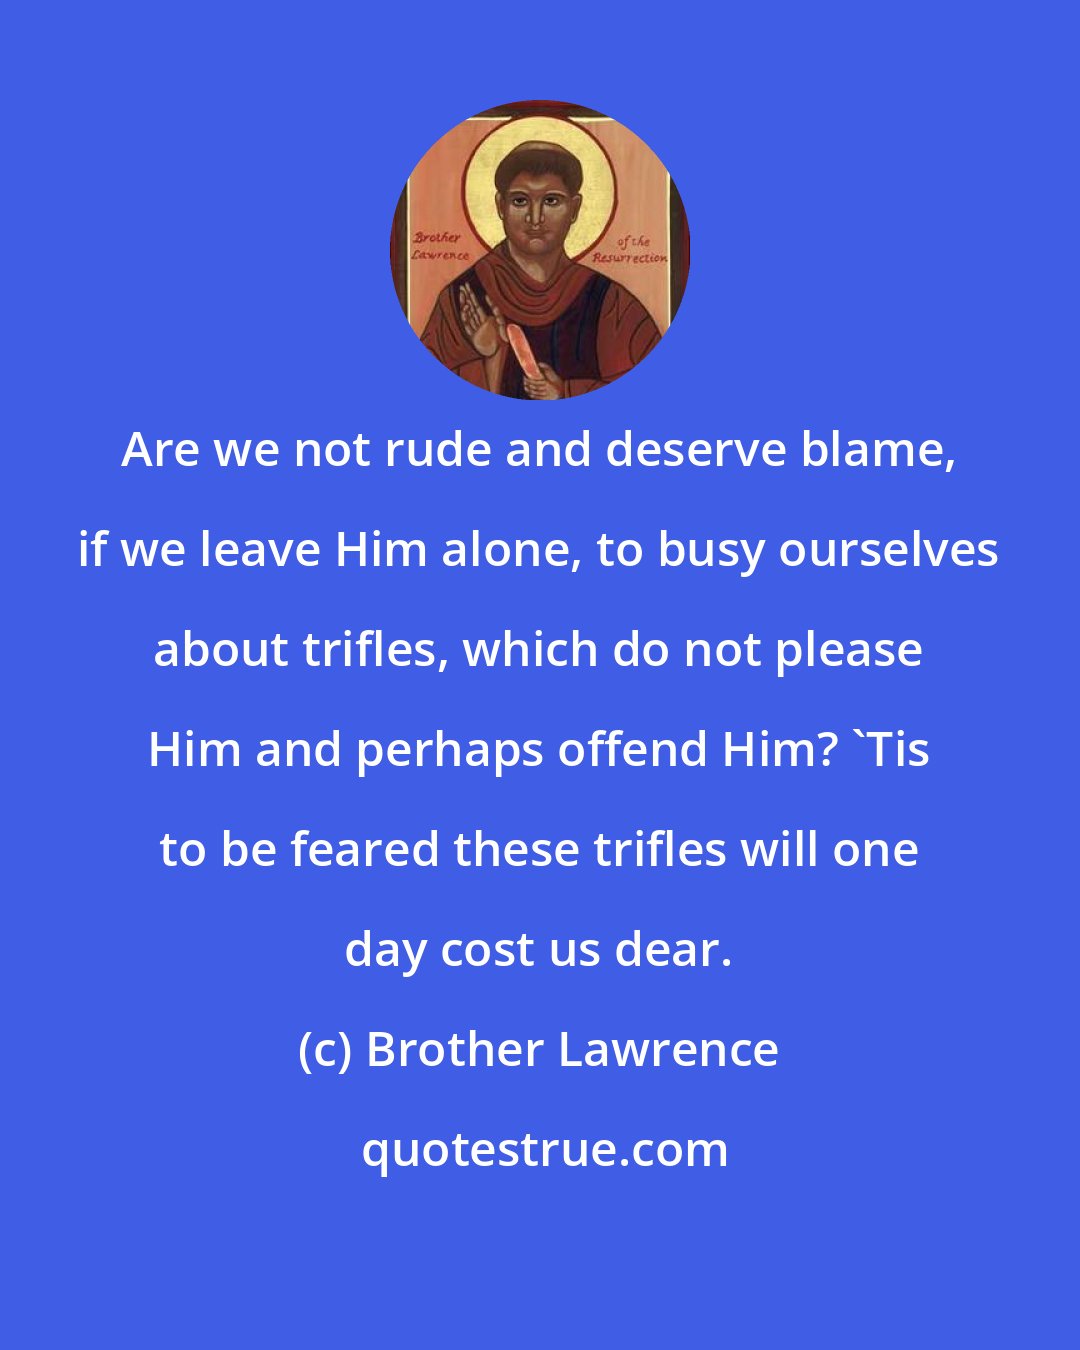 Brother Lawrence: Are we not rude and deserve blame, if we leave Him alone, to busy ourselves about trifles, which do not please Him and perhaps offend Him? 'Tis to be feared these trifles will one day cost us dear.